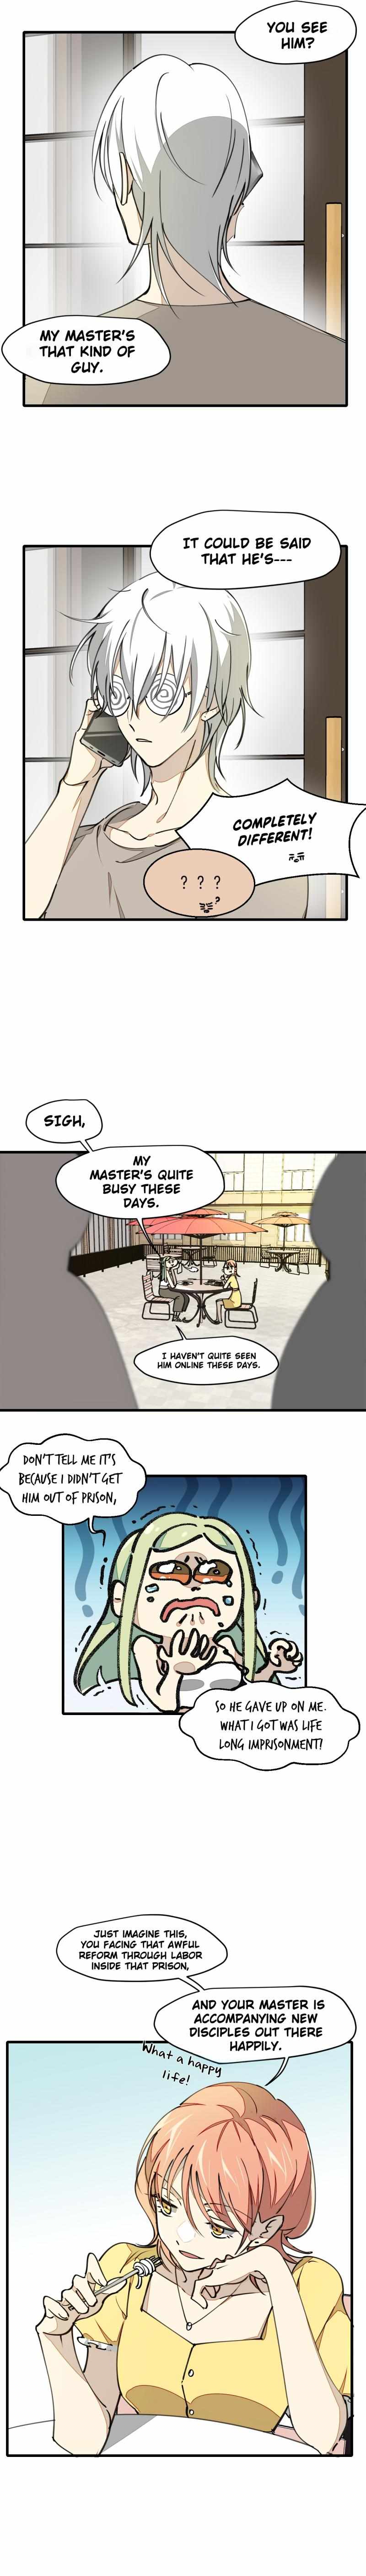 Master Wants Me Dead - chapter 5 - #5